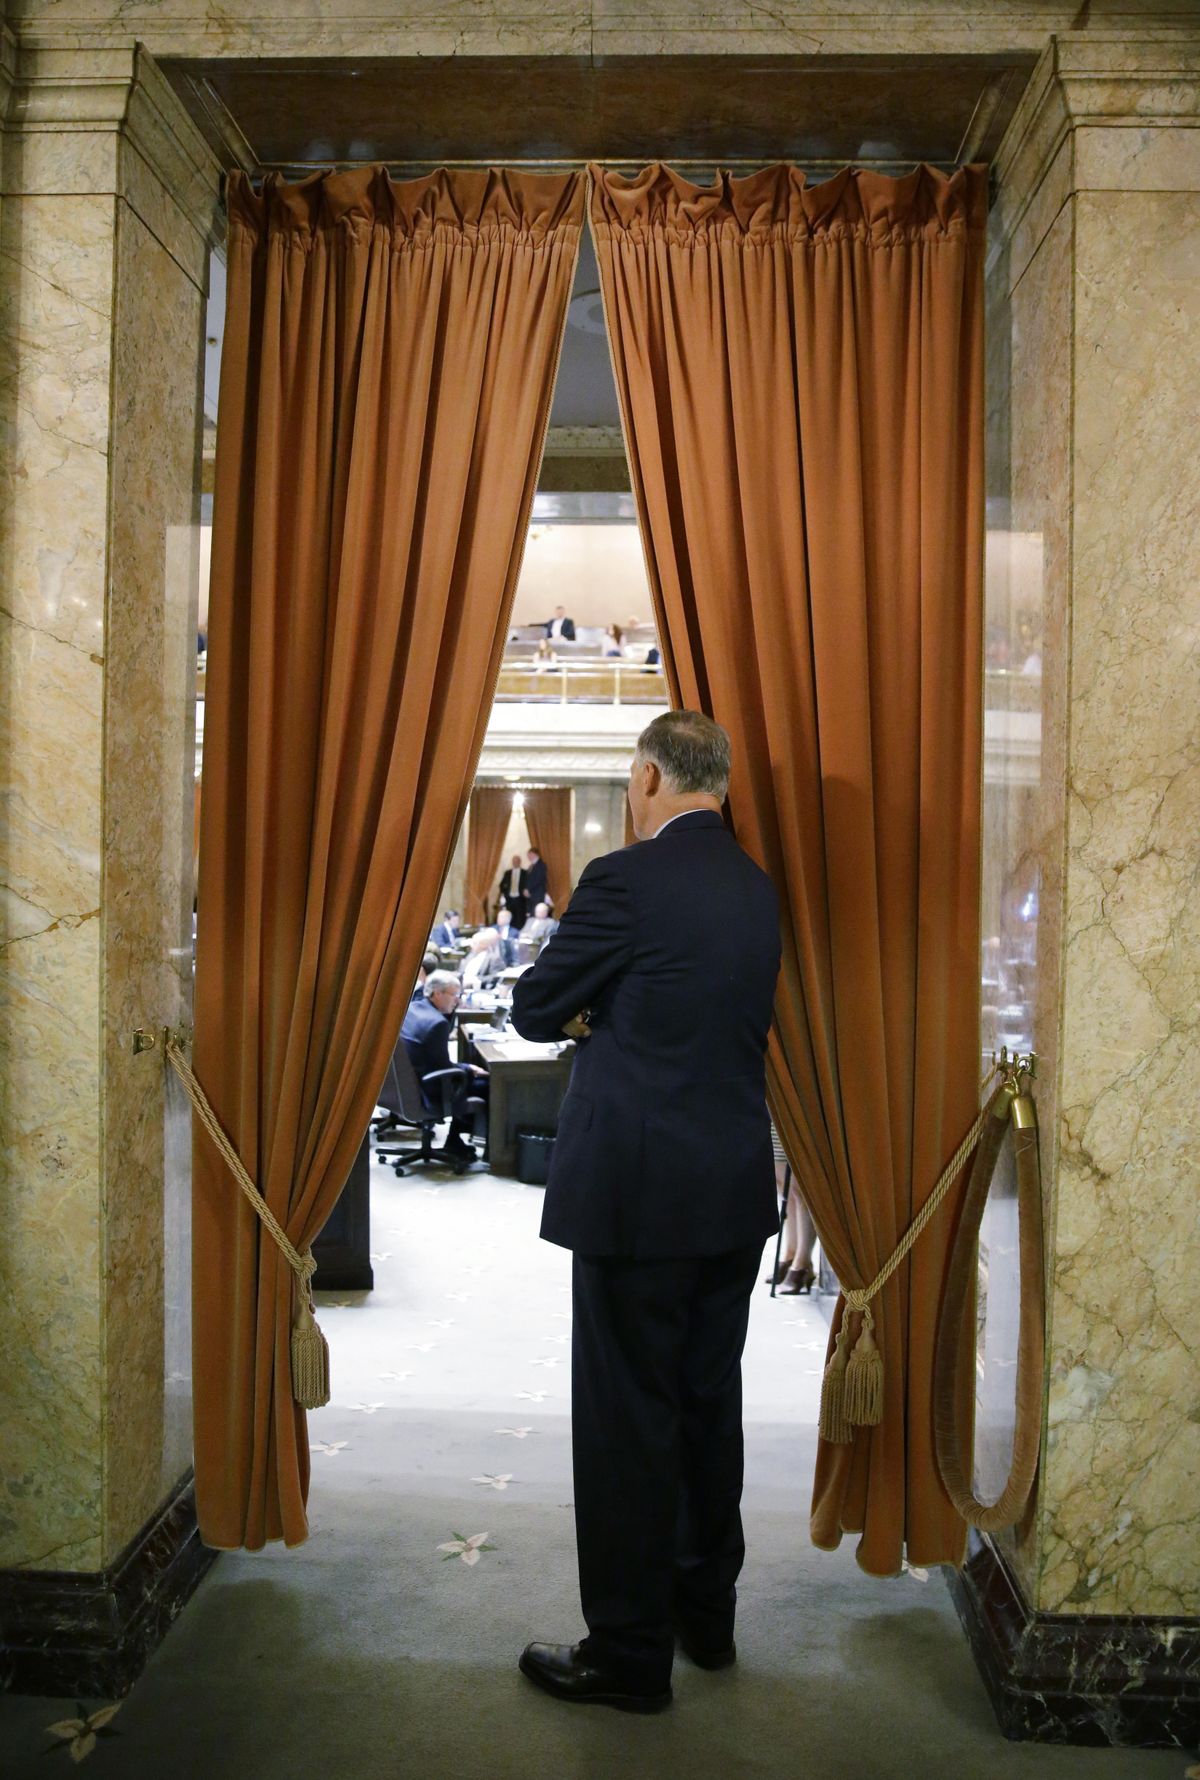 Washington Gov. Jay Inslee watches from the wings of the House chamber Friday during debate on the state operating budget at the Capitol in Olympia. (Ted S. Warren / Associated Press)